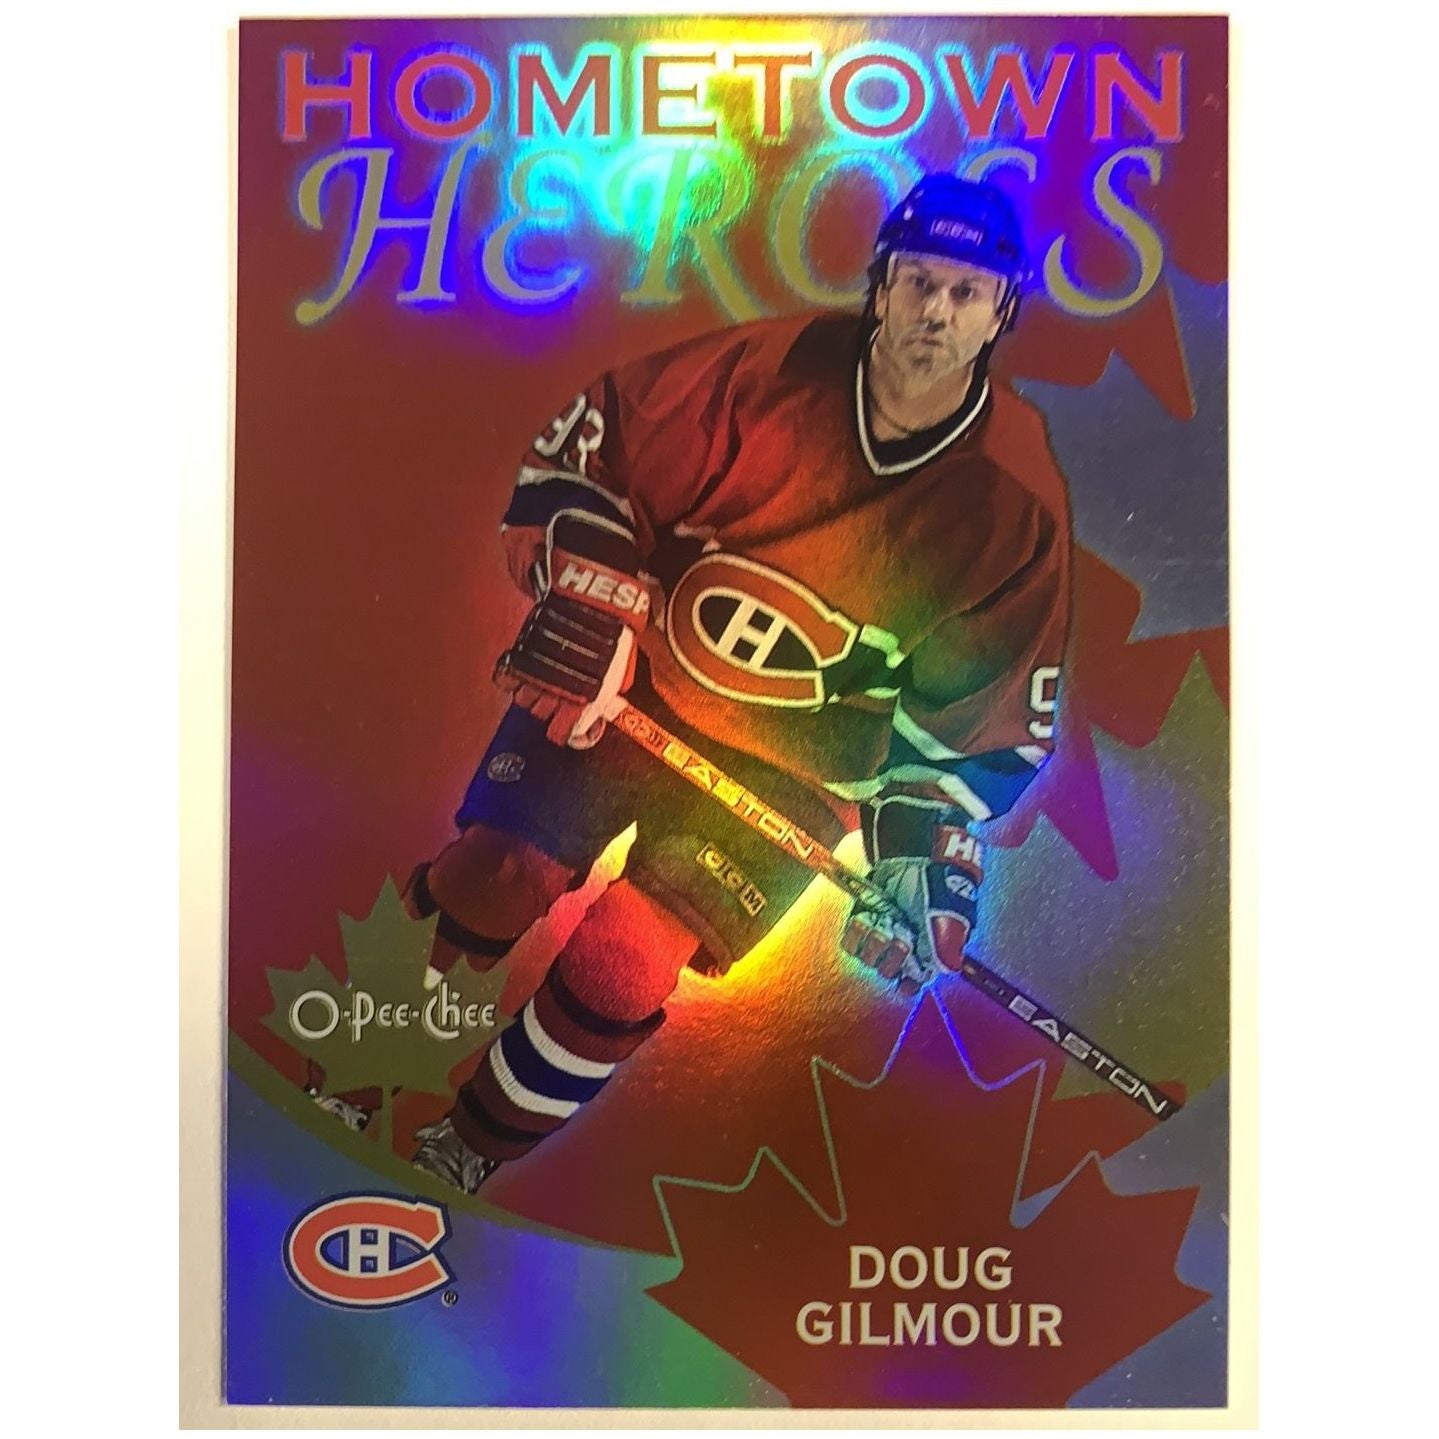  2002 O-Pee-Chee Doug Gilmour Hometown Heroes  Local Legends Cards & Collectibles